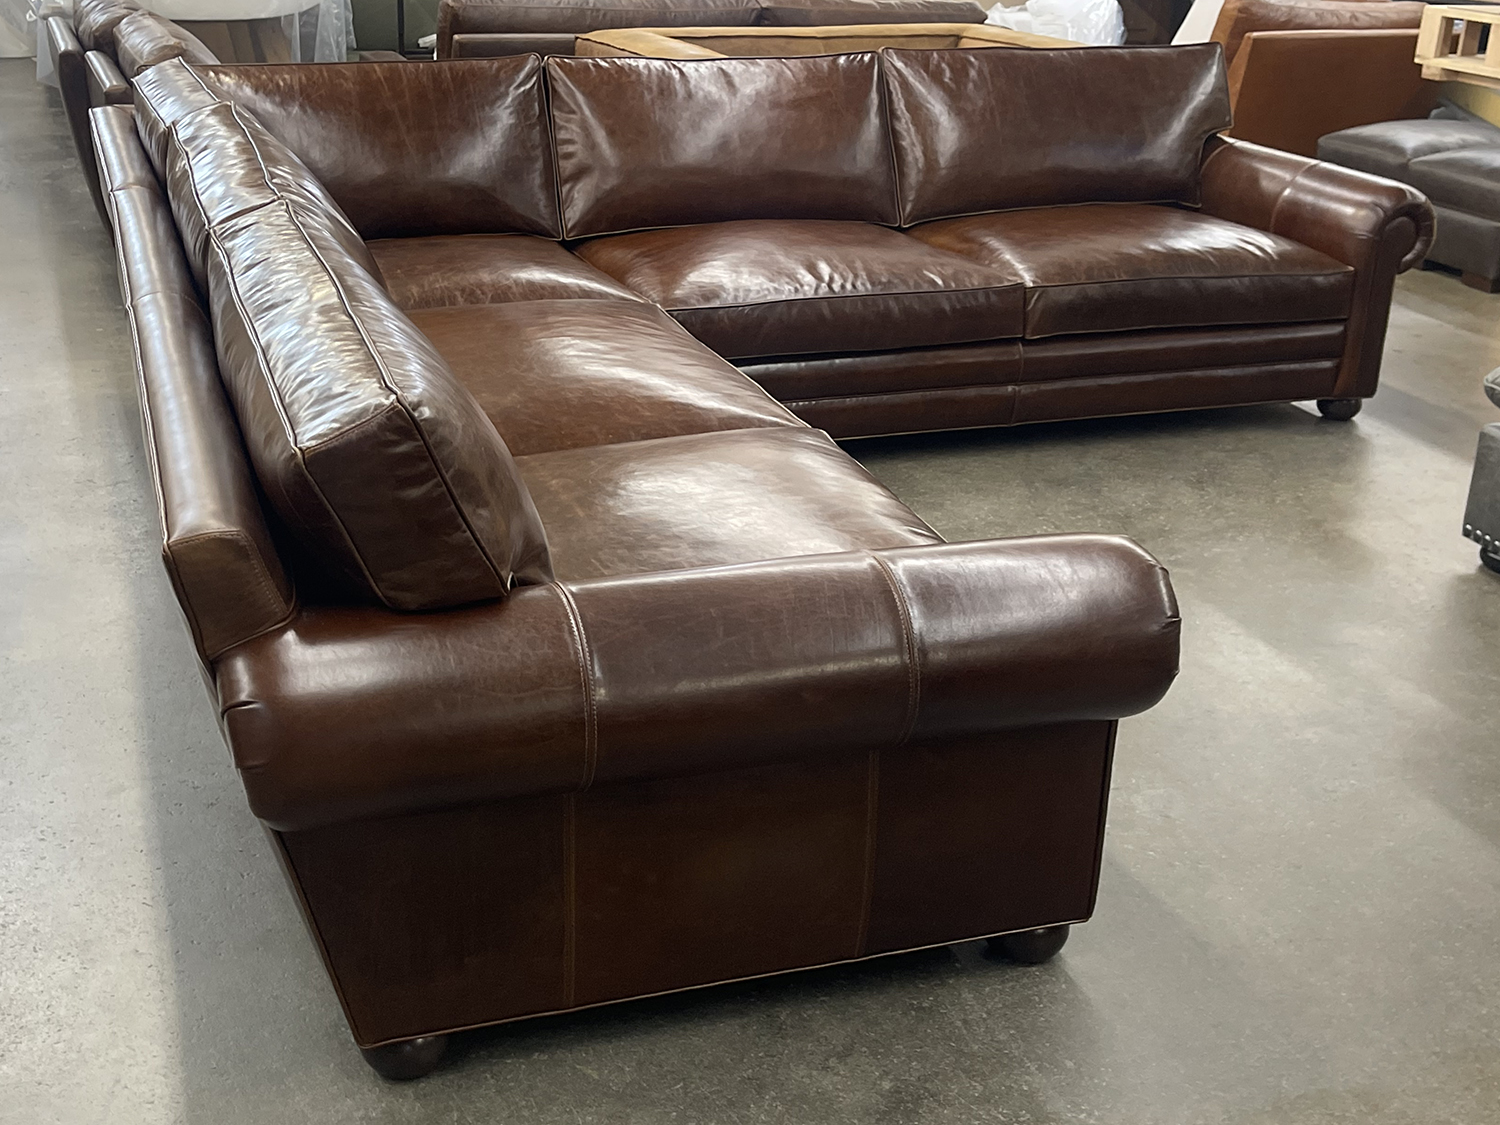 Langston Grand Corner Sectional in Mont Blanc Bourbon Leather - LAF side view